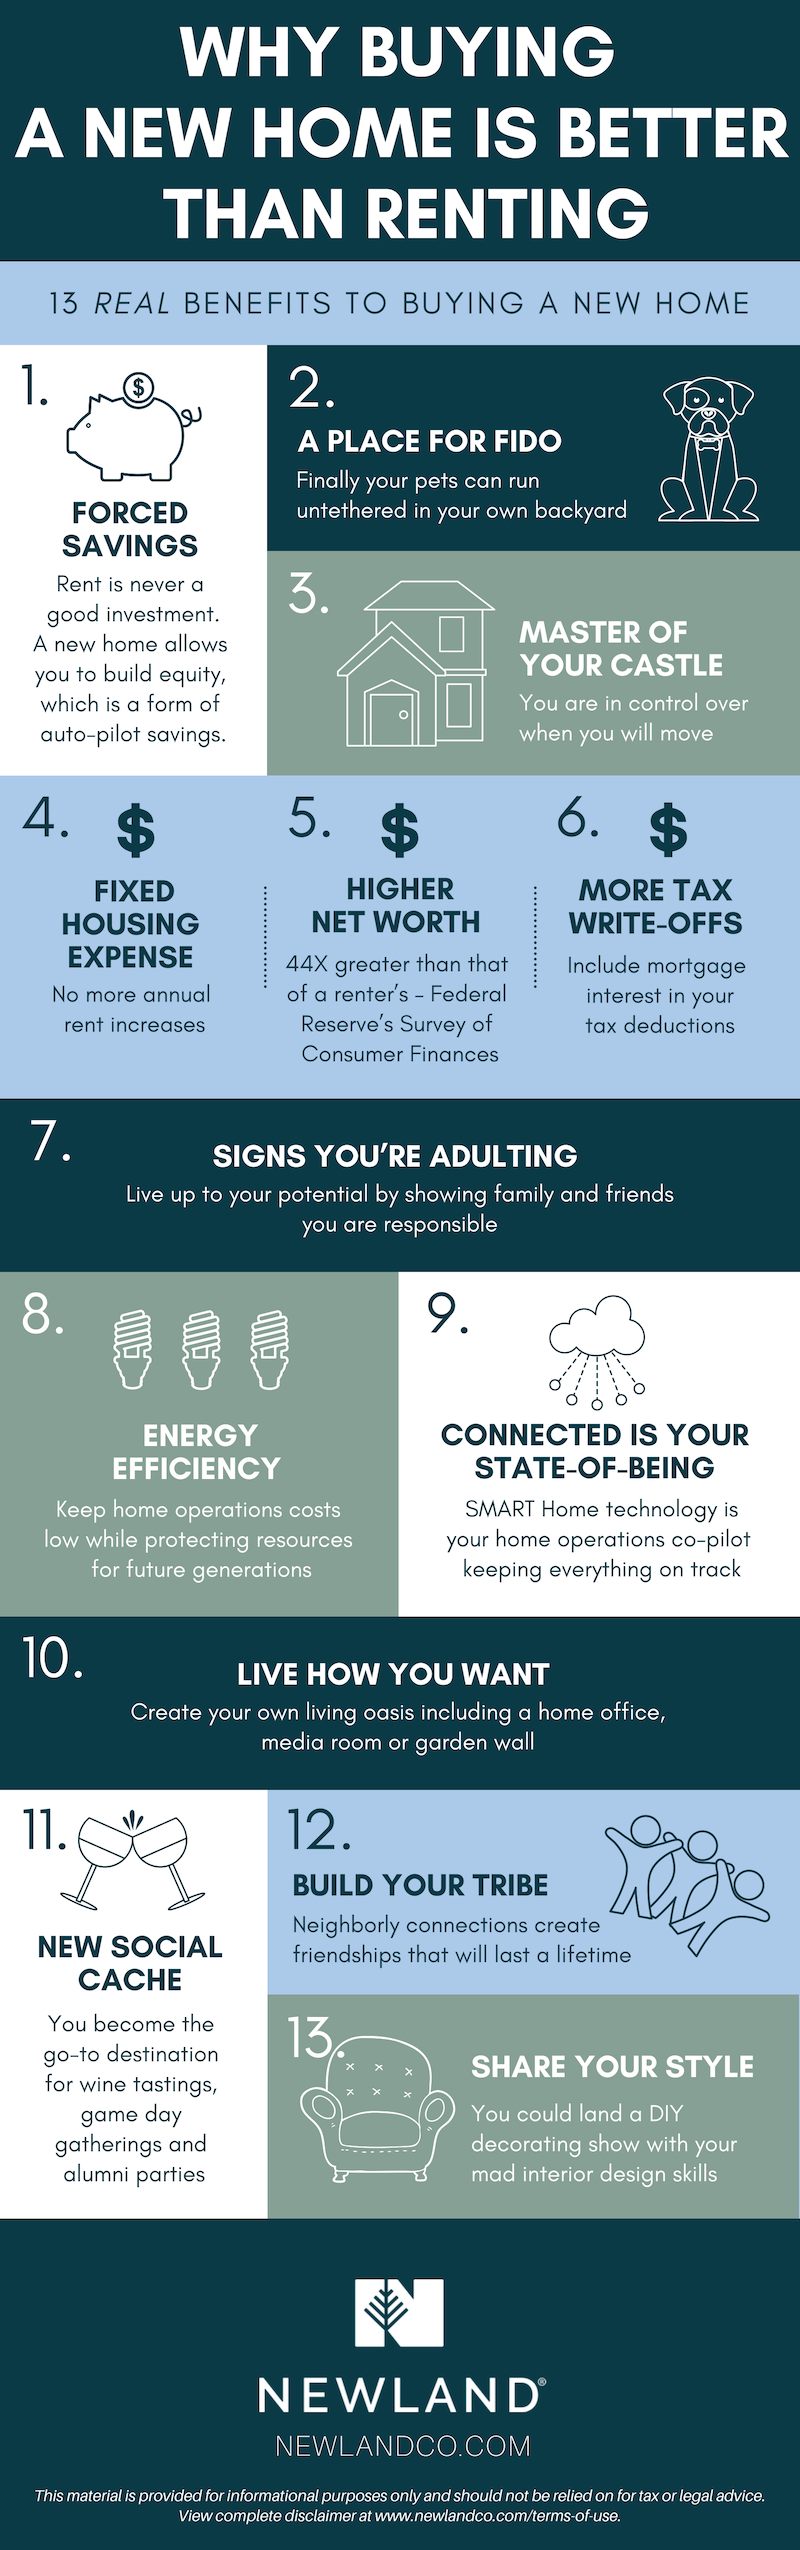 13 Reason Why Buying a New Home is Better than Renting Infographic